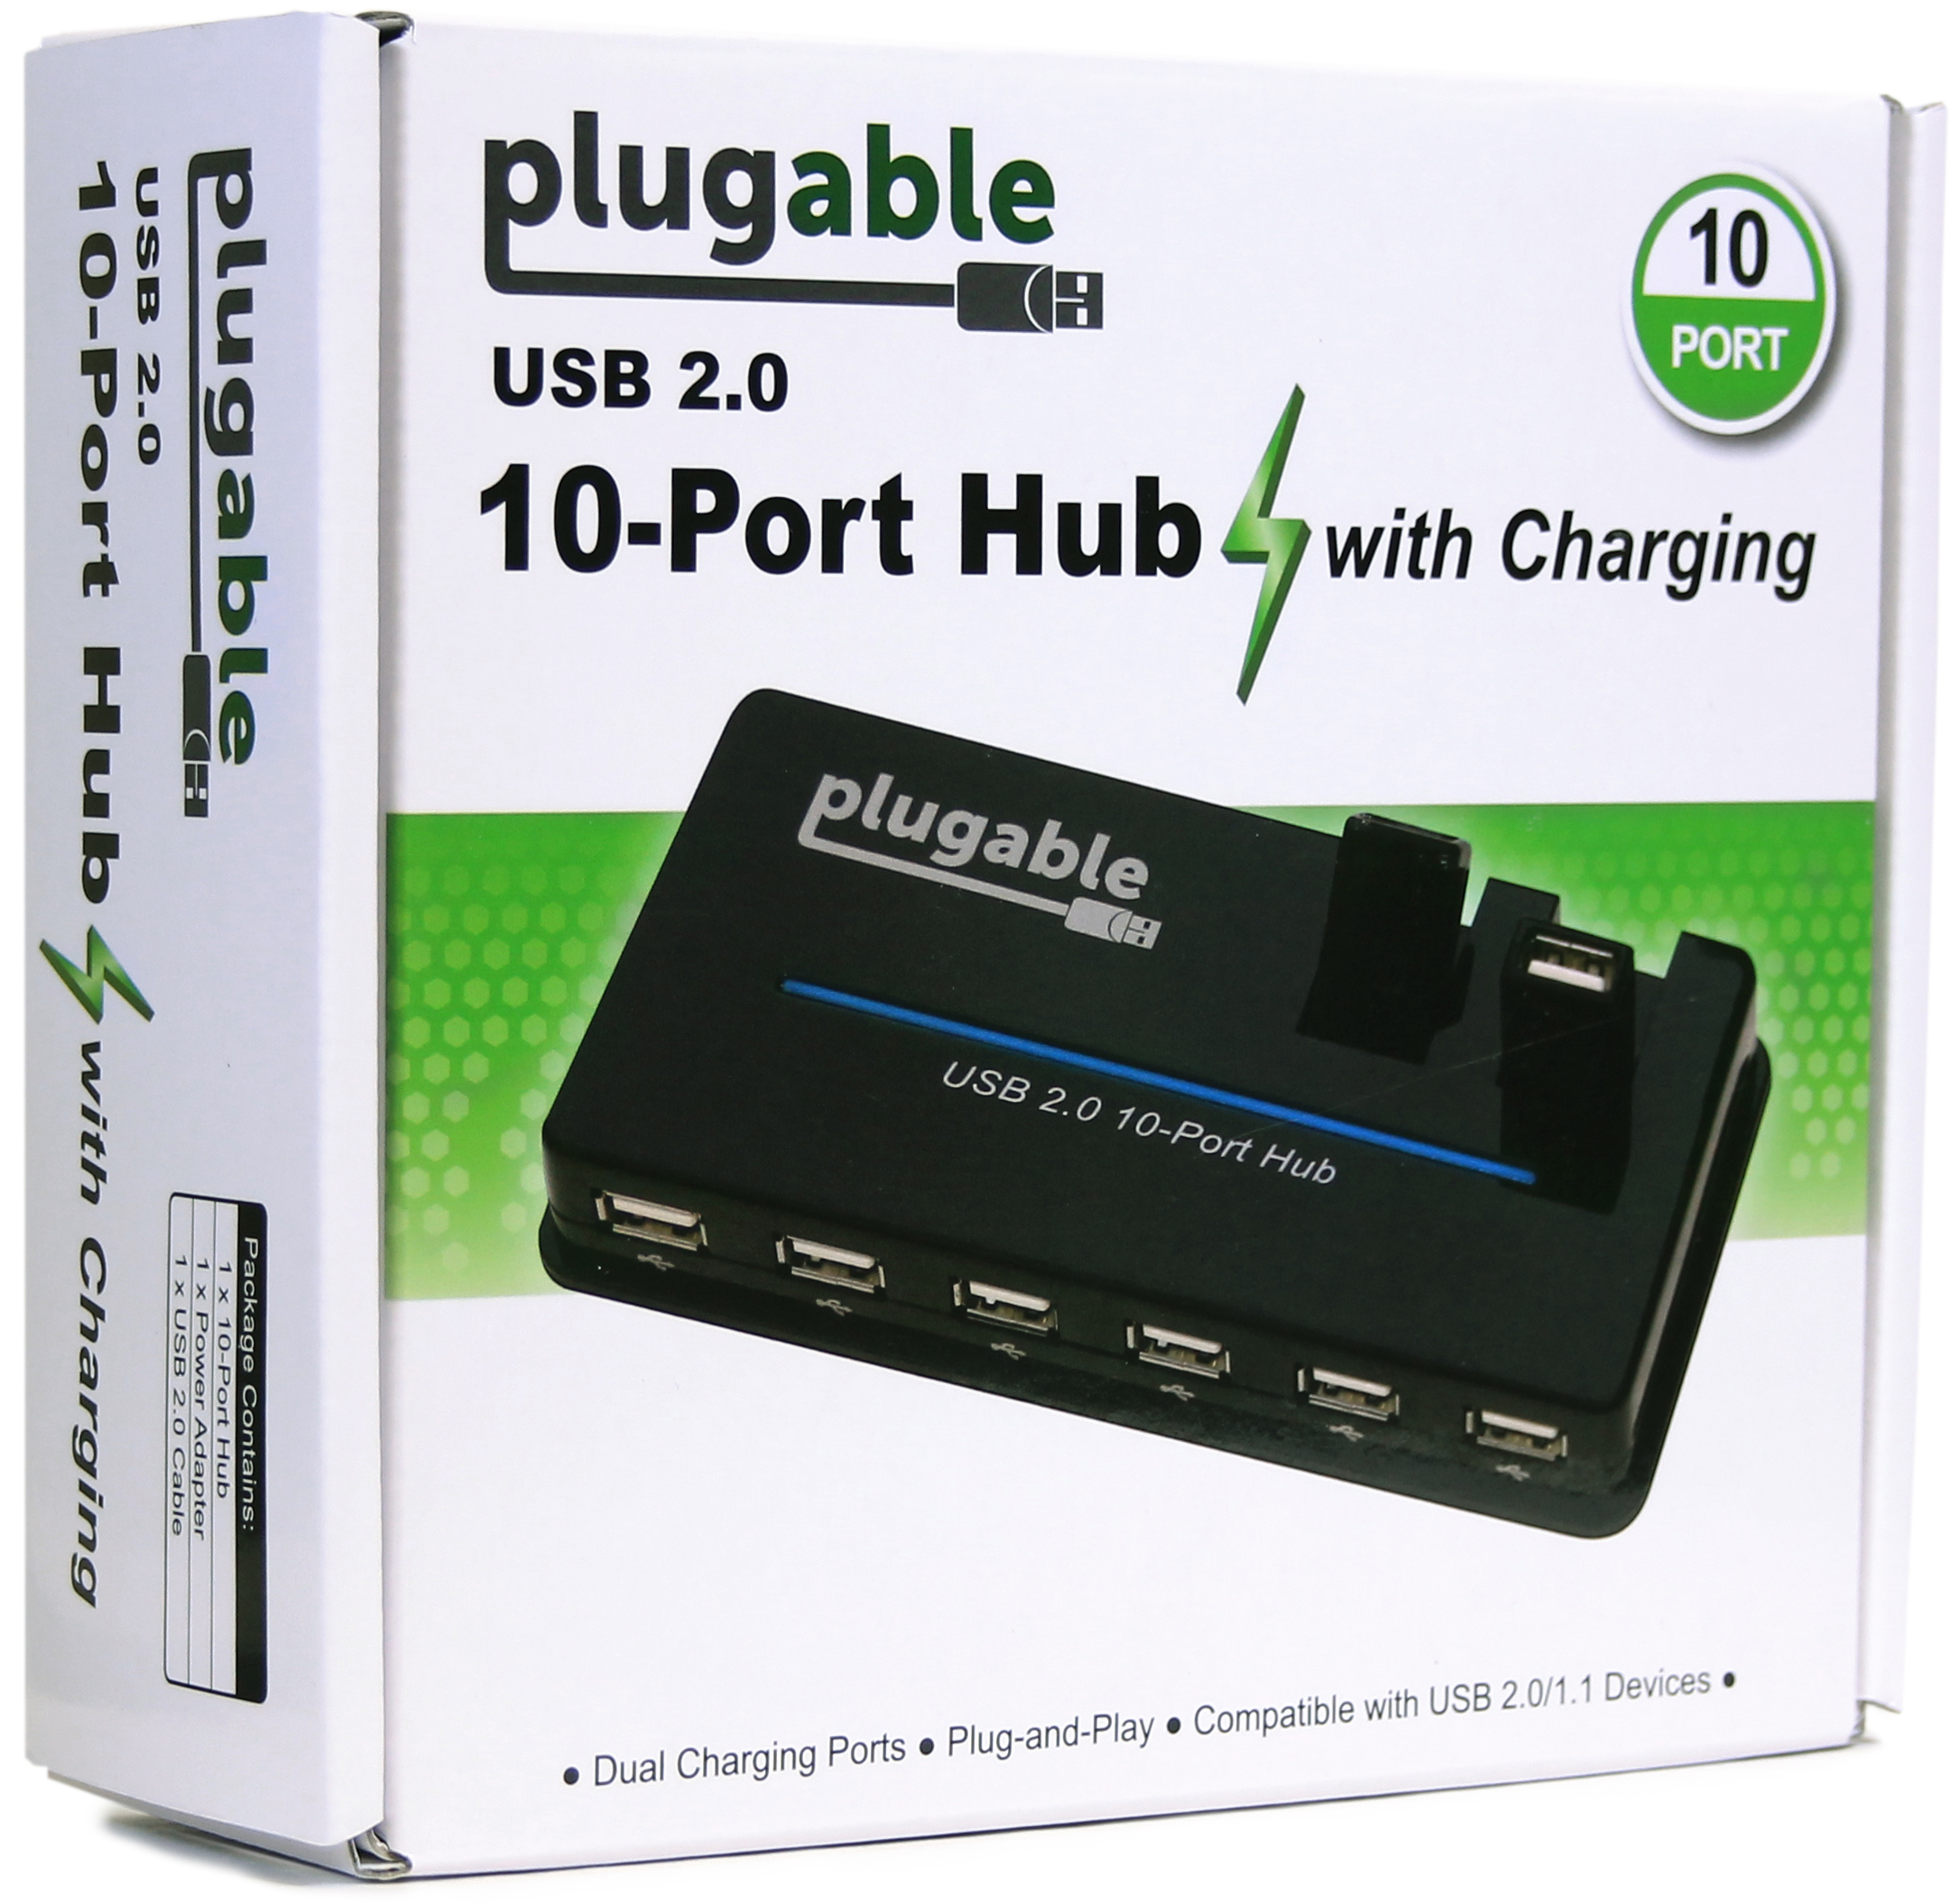 Plugable USB Hub, 10 Port - USB 2.0 with 20W Power Adapter and Two Flip-Up Ports - image 4 of 6